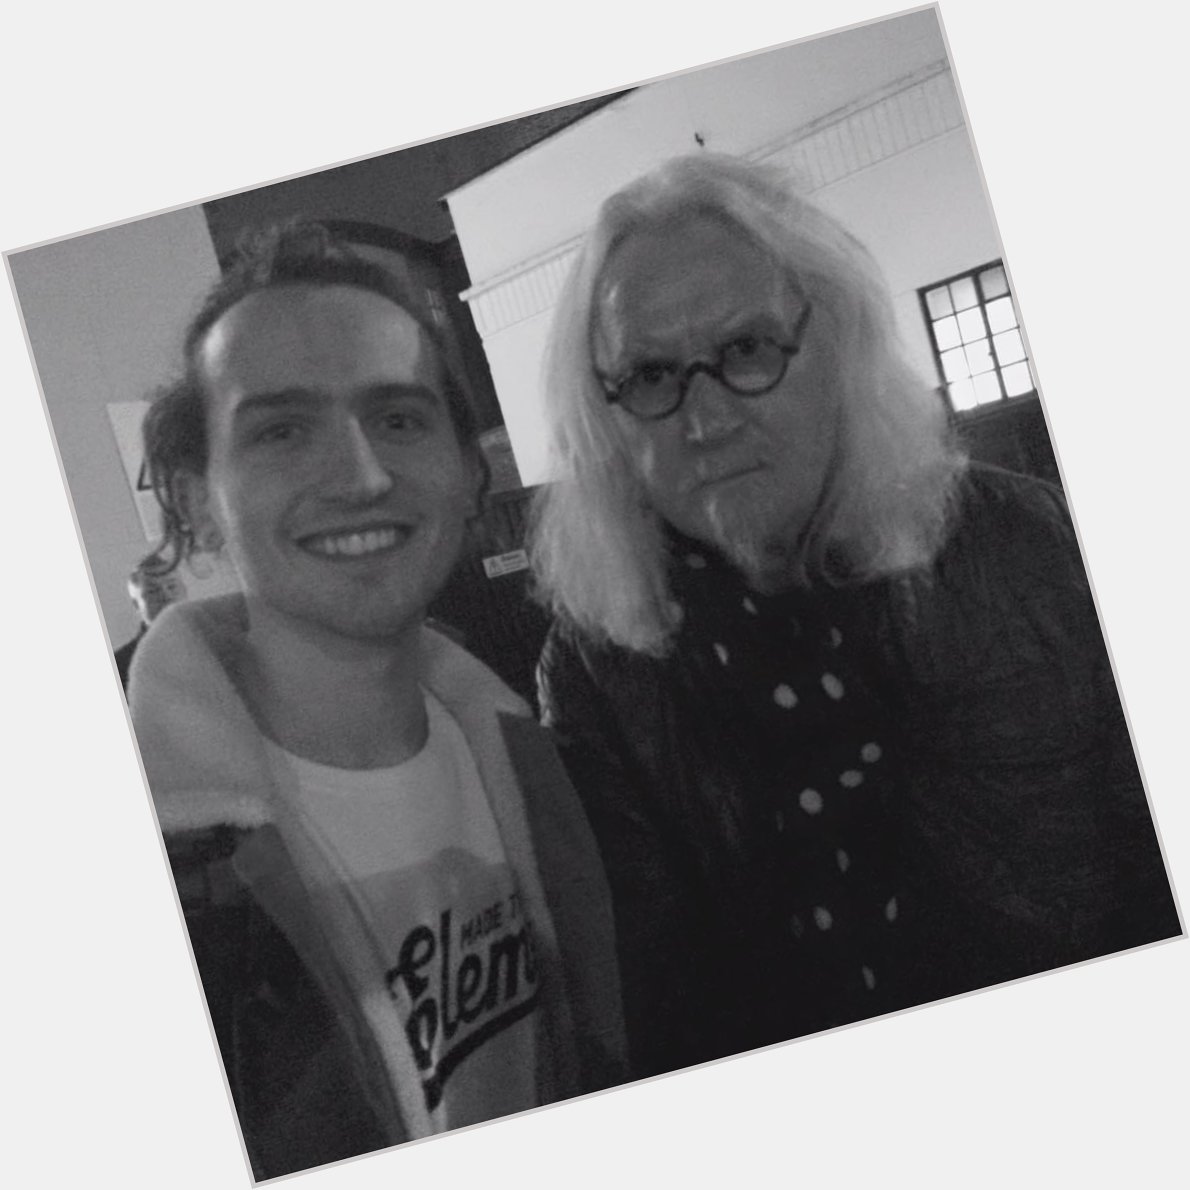 Happy 80th birthday billy connolly, here s a photo from when I was lucky enough to meet you in 2016, icon x 